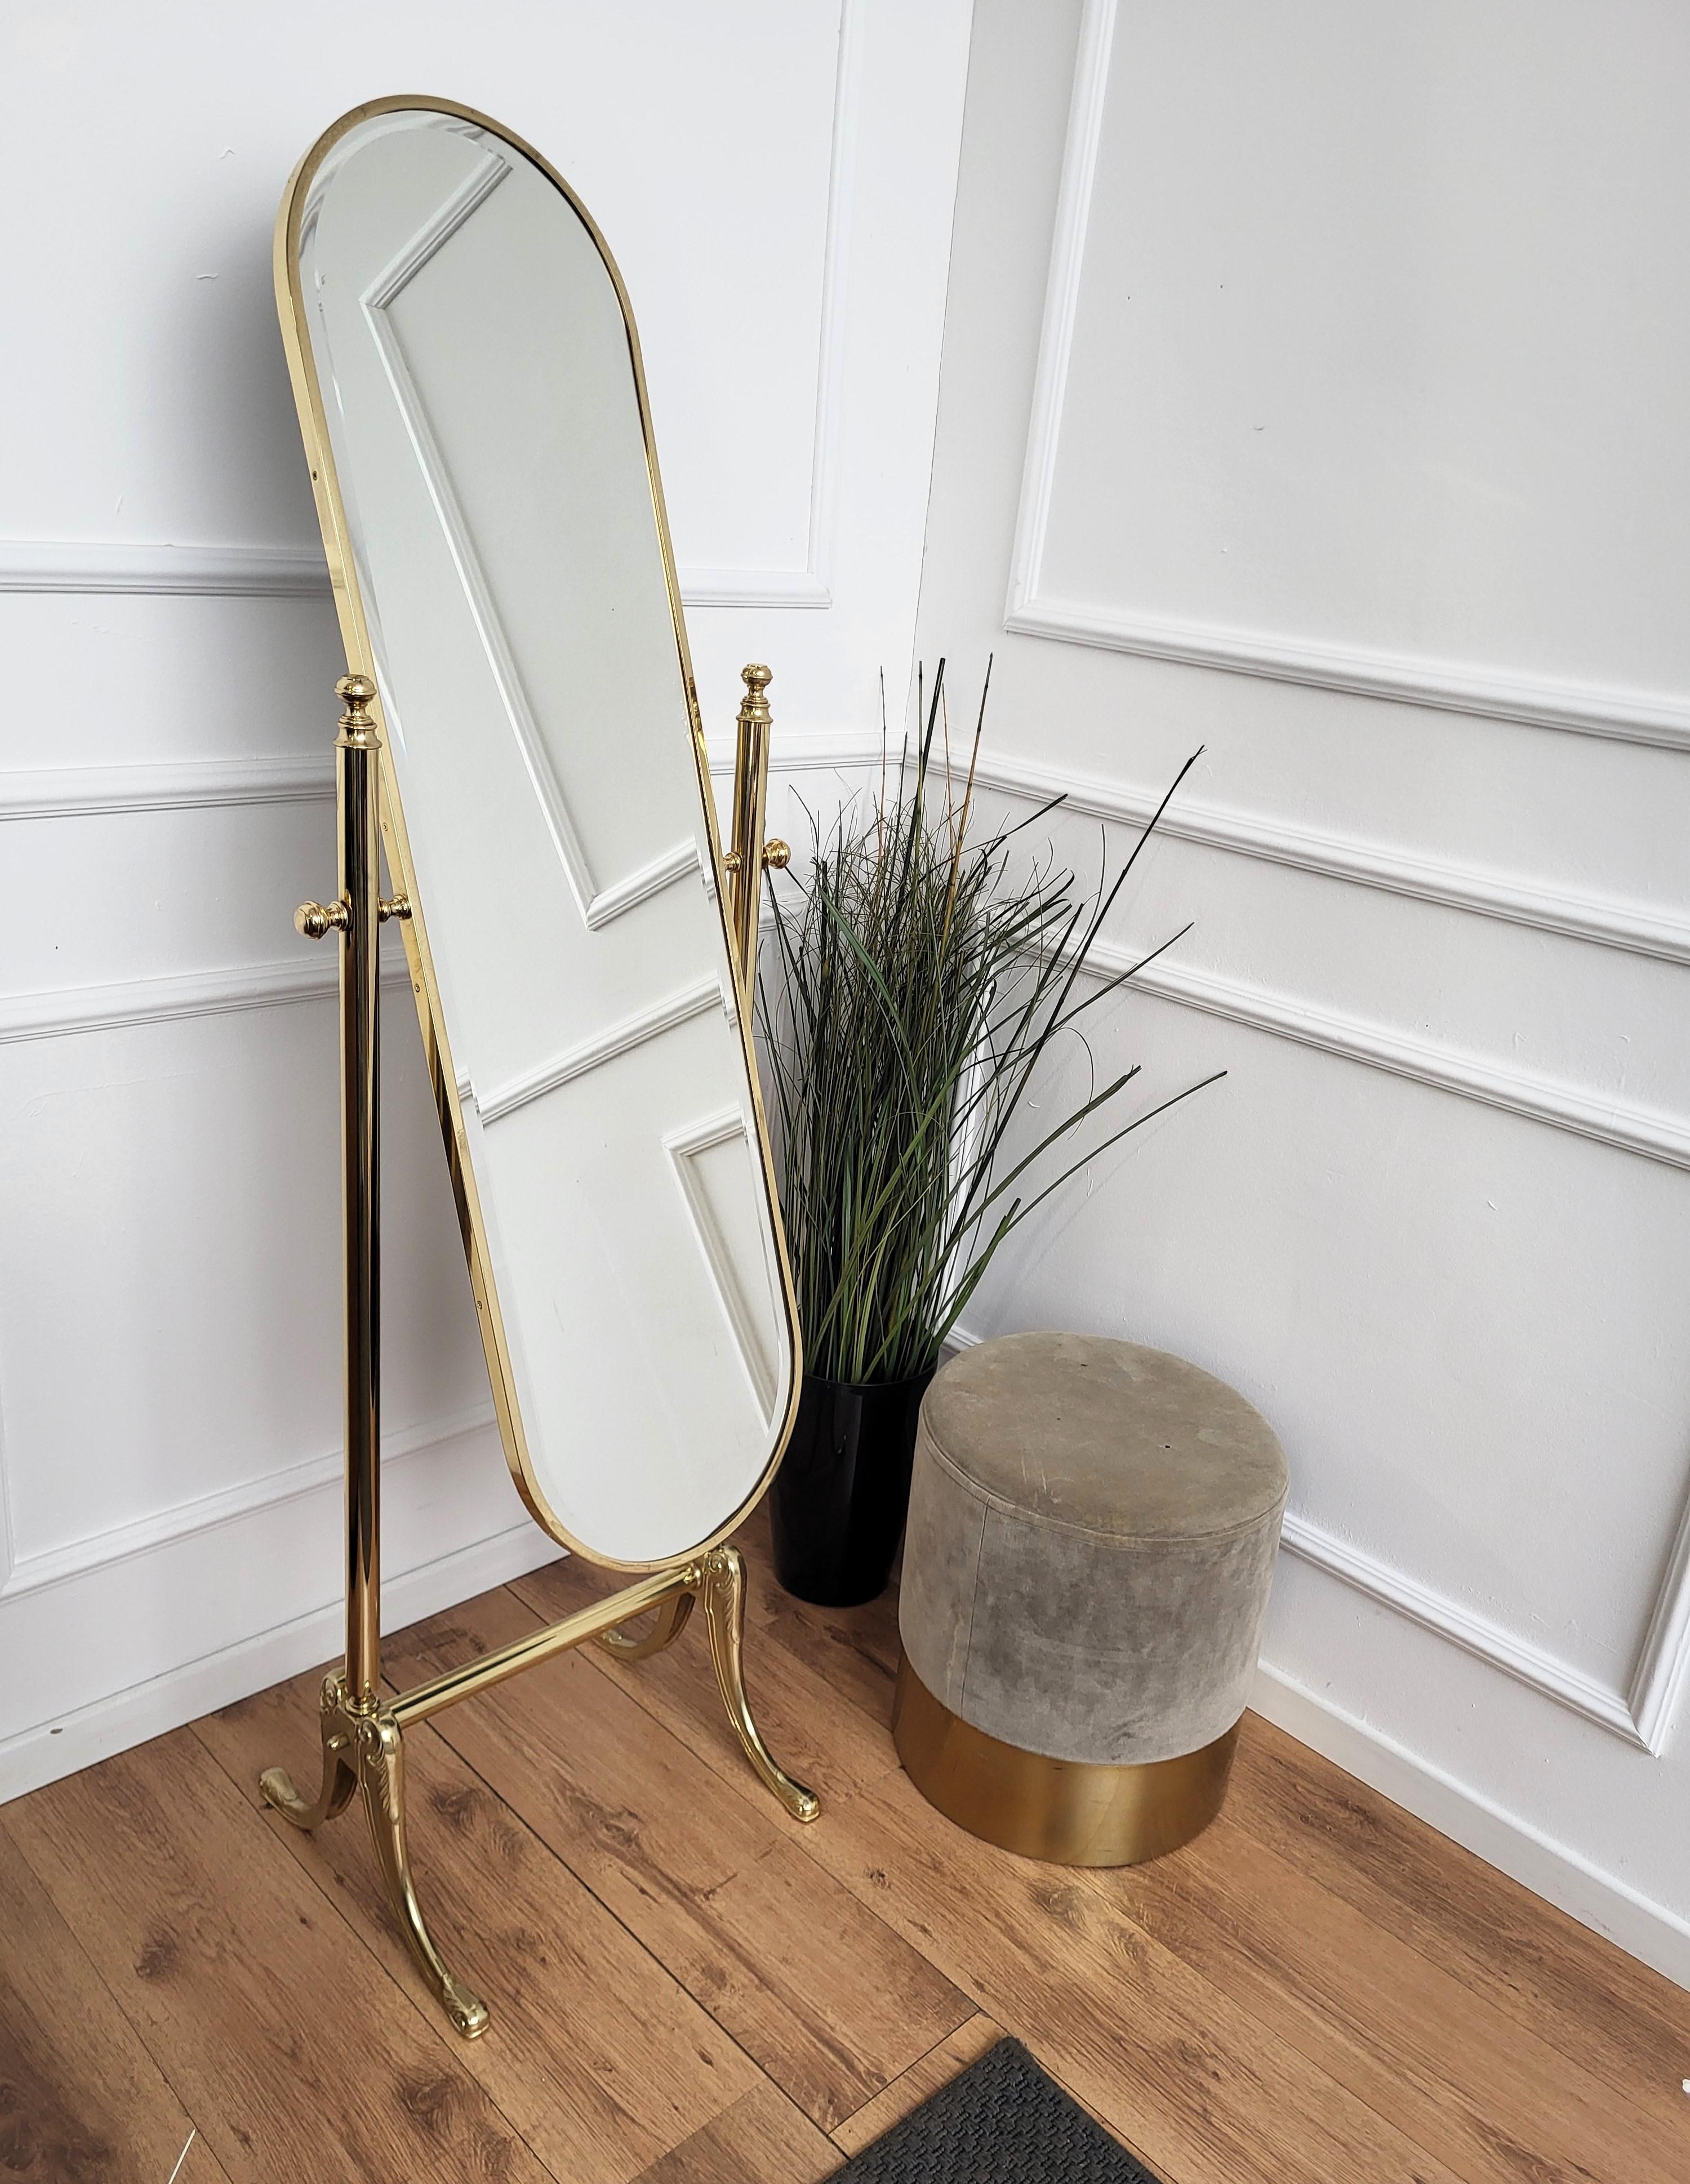 Beautiful brass full-length cheval floor mirror that can be rotated according to the preferred angle. The mirror is bevele and the conditions are excellent, with very minor fading and patina. A great piece that perfectly adds to every home decor the